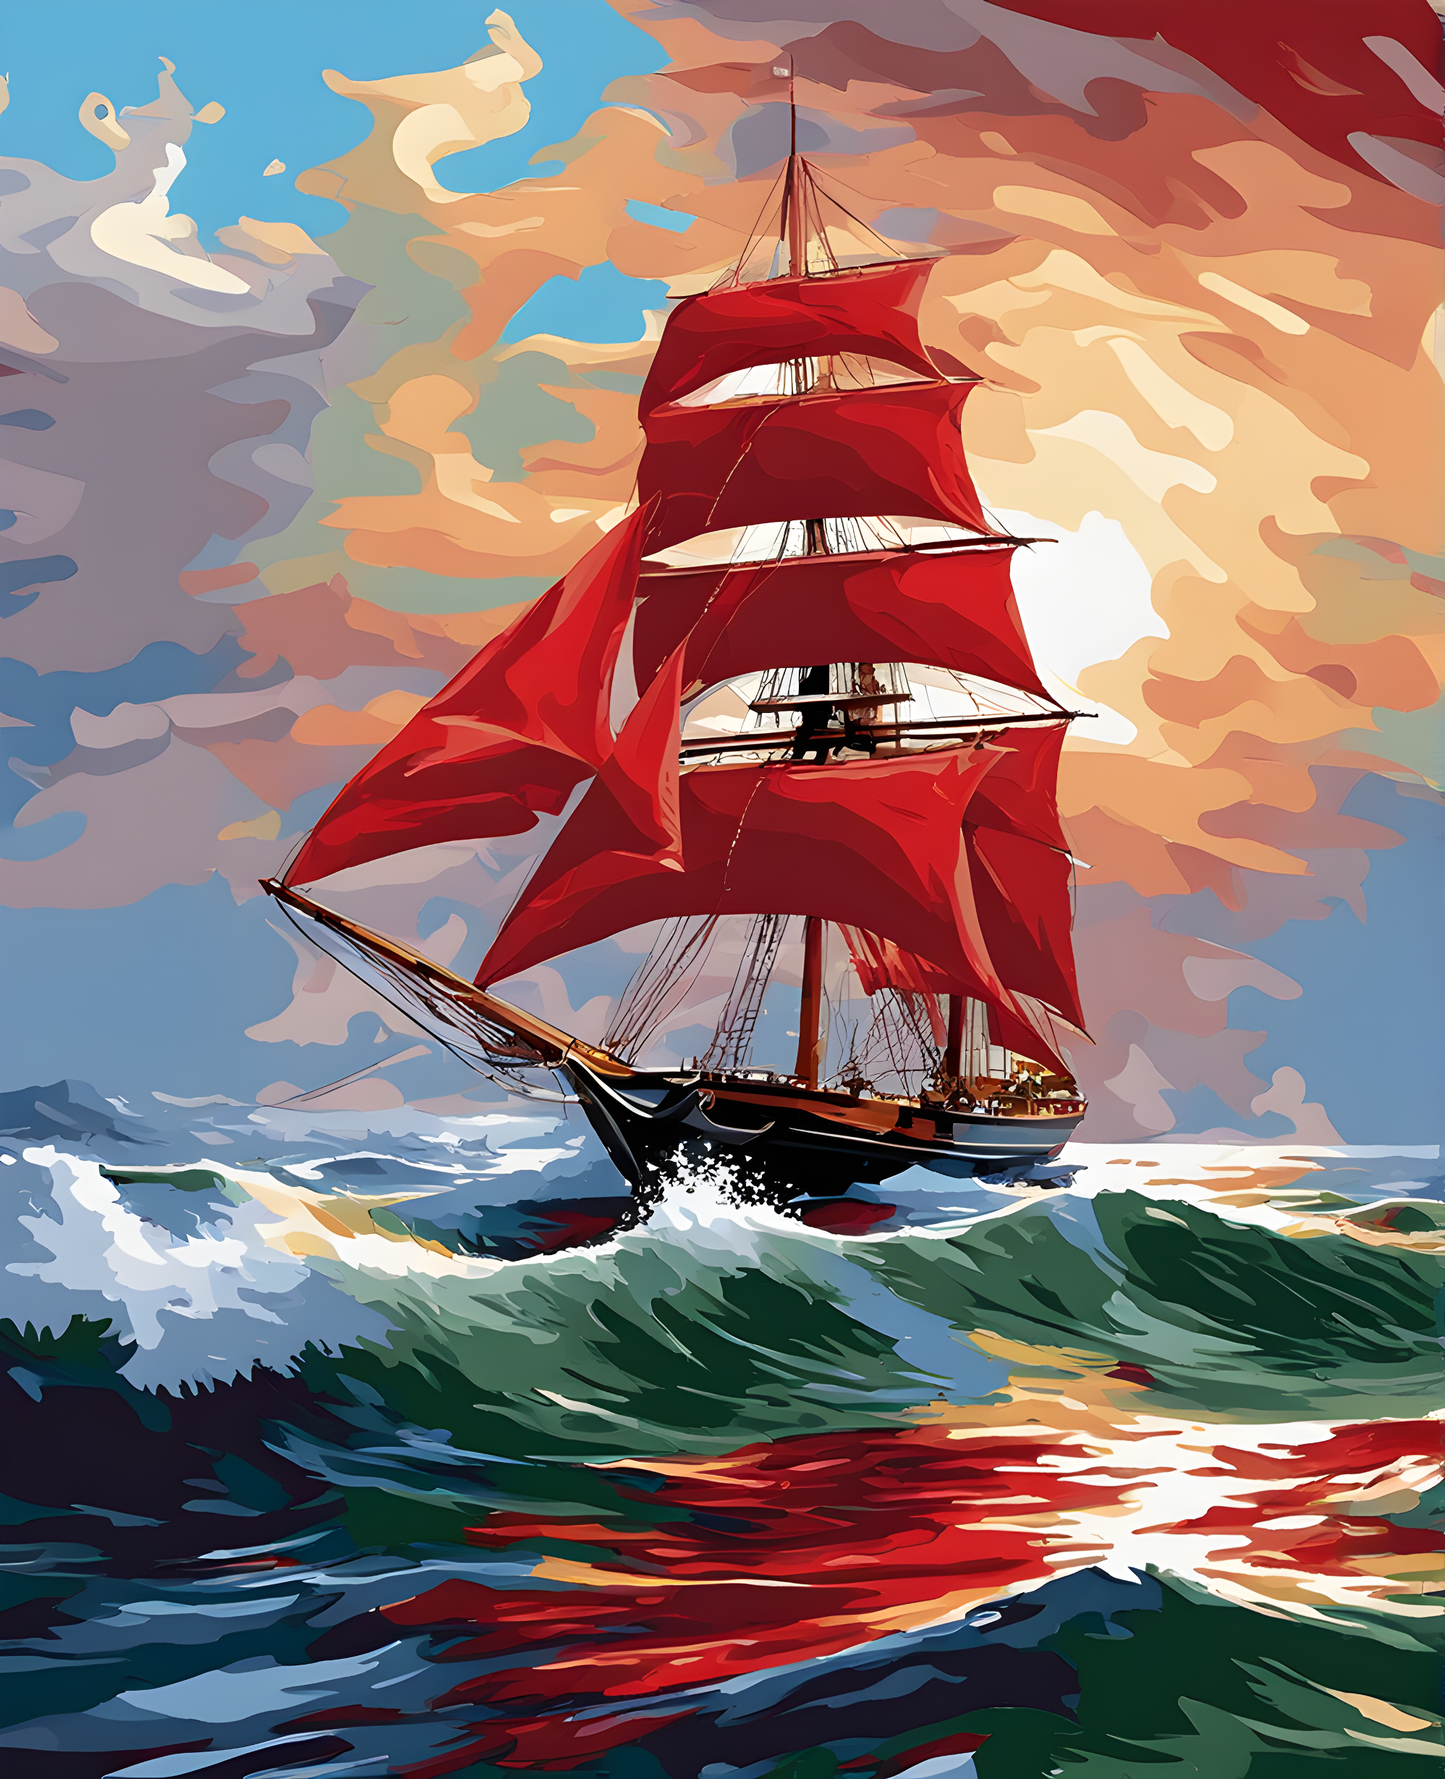 Red Sails at Sea (3) - Van-Go Paint-By-Number Kit